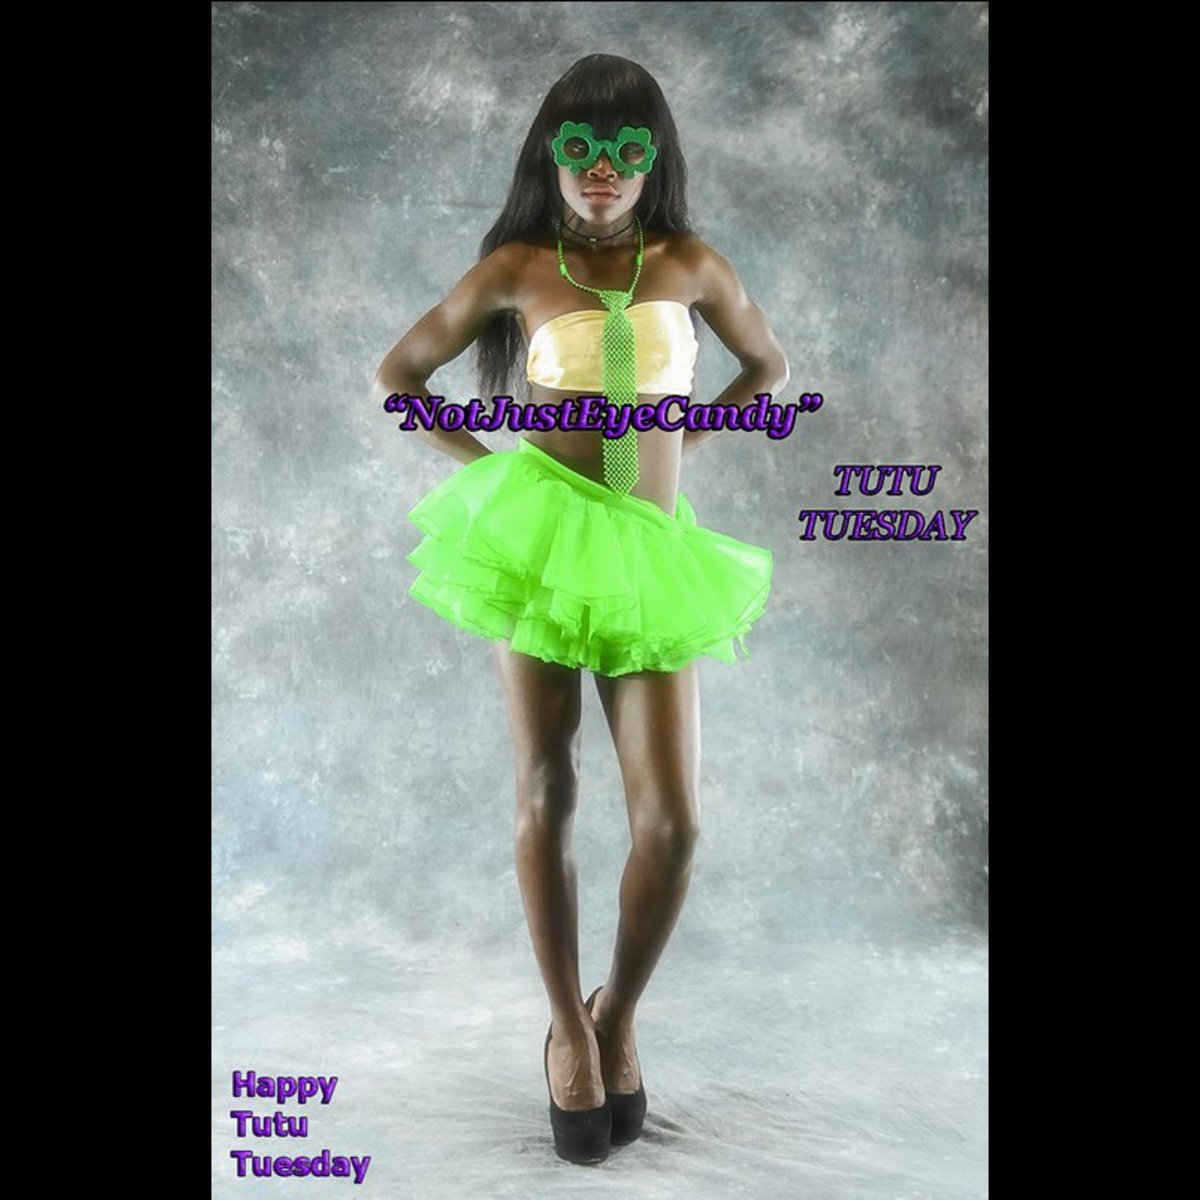 #TutuTuesday Greetings from 'NotJustEyeCandy' and Model: STASHA

Uncensored and revealing photo sets available. DM for details.
#tutu #GreenTutu #Green #follow #PhotoOfTheDay #Like4Like #PictureOfTheDay #LikeForLike #PhotographOfTheDay #20likes #Melanin #MelaninQueen